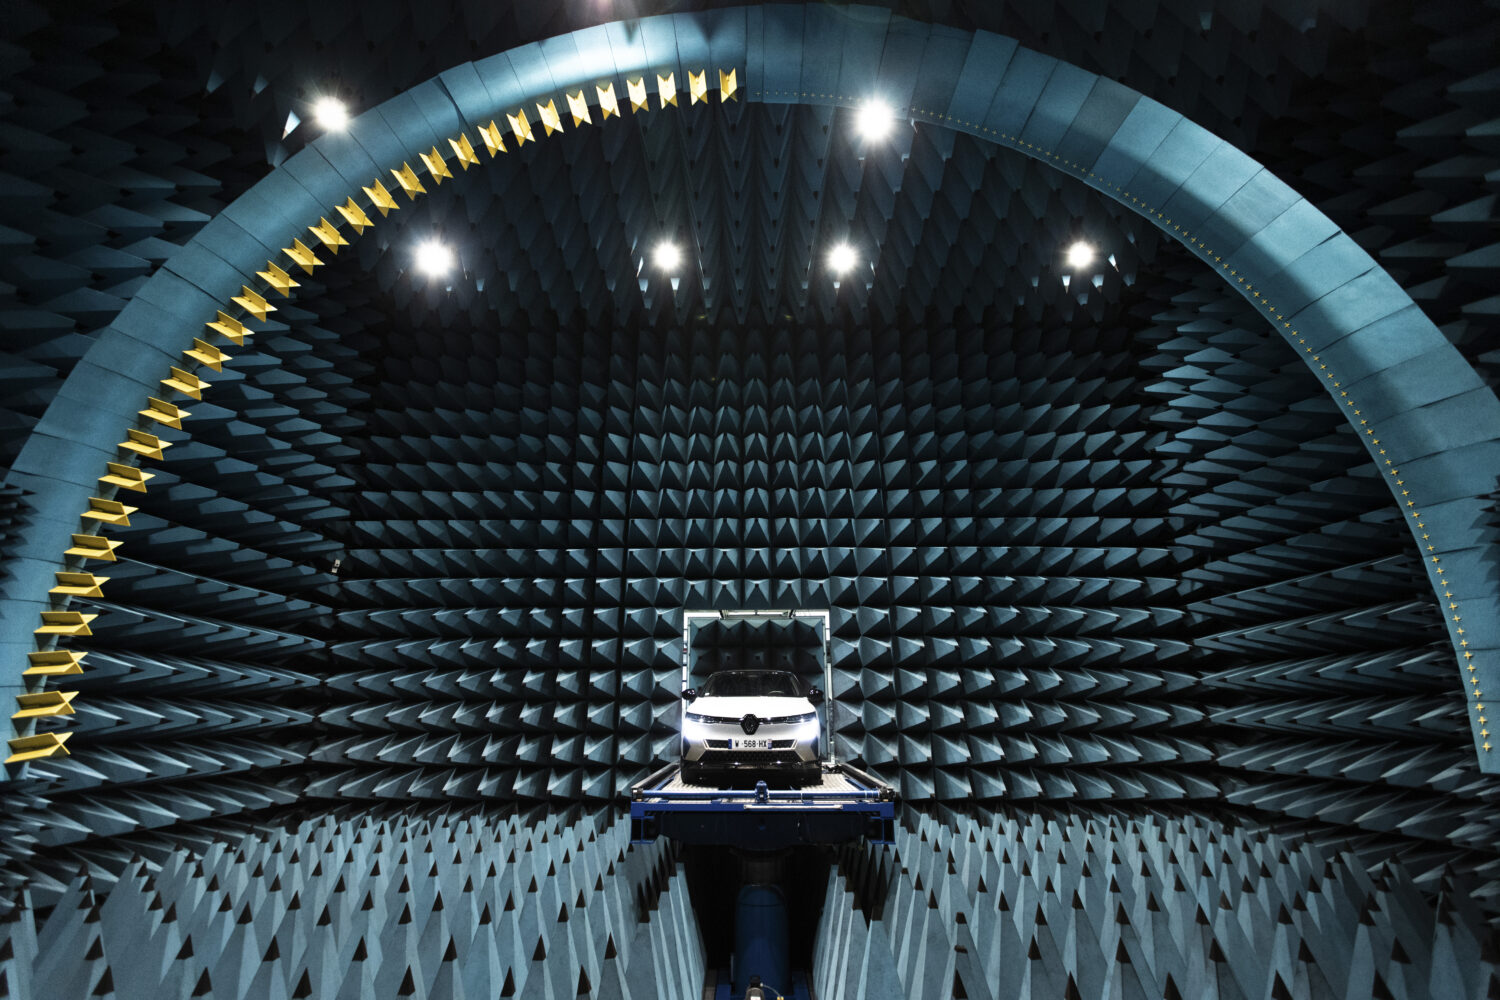 2022 - Story Renault - Hidden treasures: the secrets of the Renault's anechoic chambers